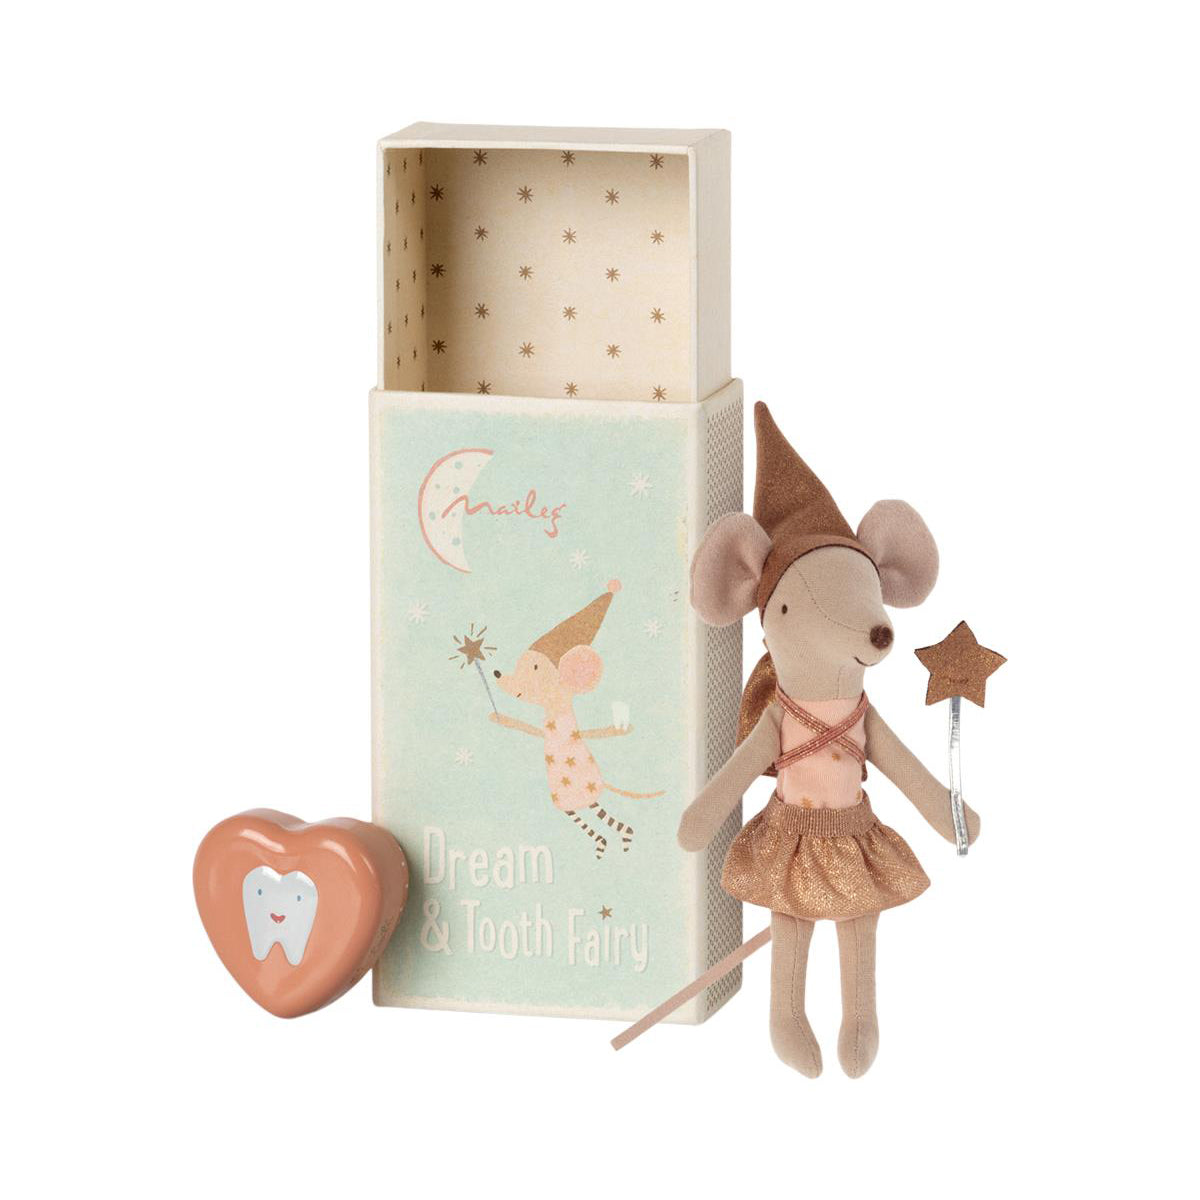 Maileg Tooth fairy Mouse in Matchbox, Big Sister - Rose -(Discontinued)